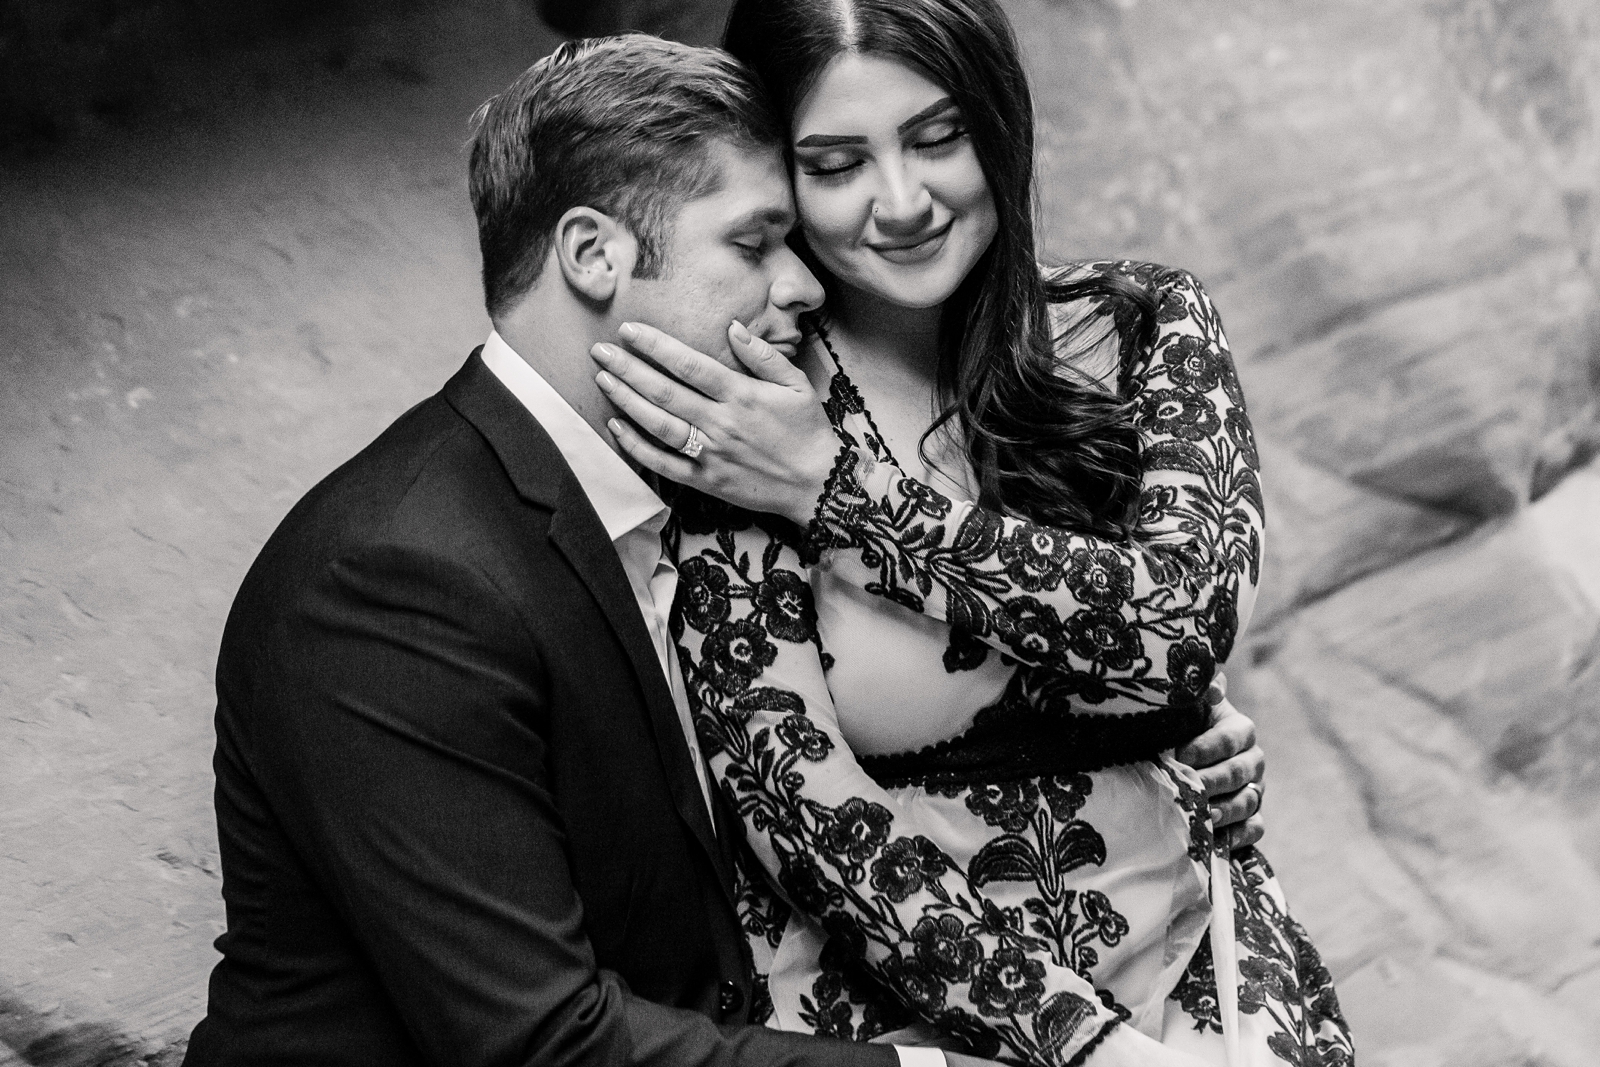 Dreamy lovers at their UT engagement session